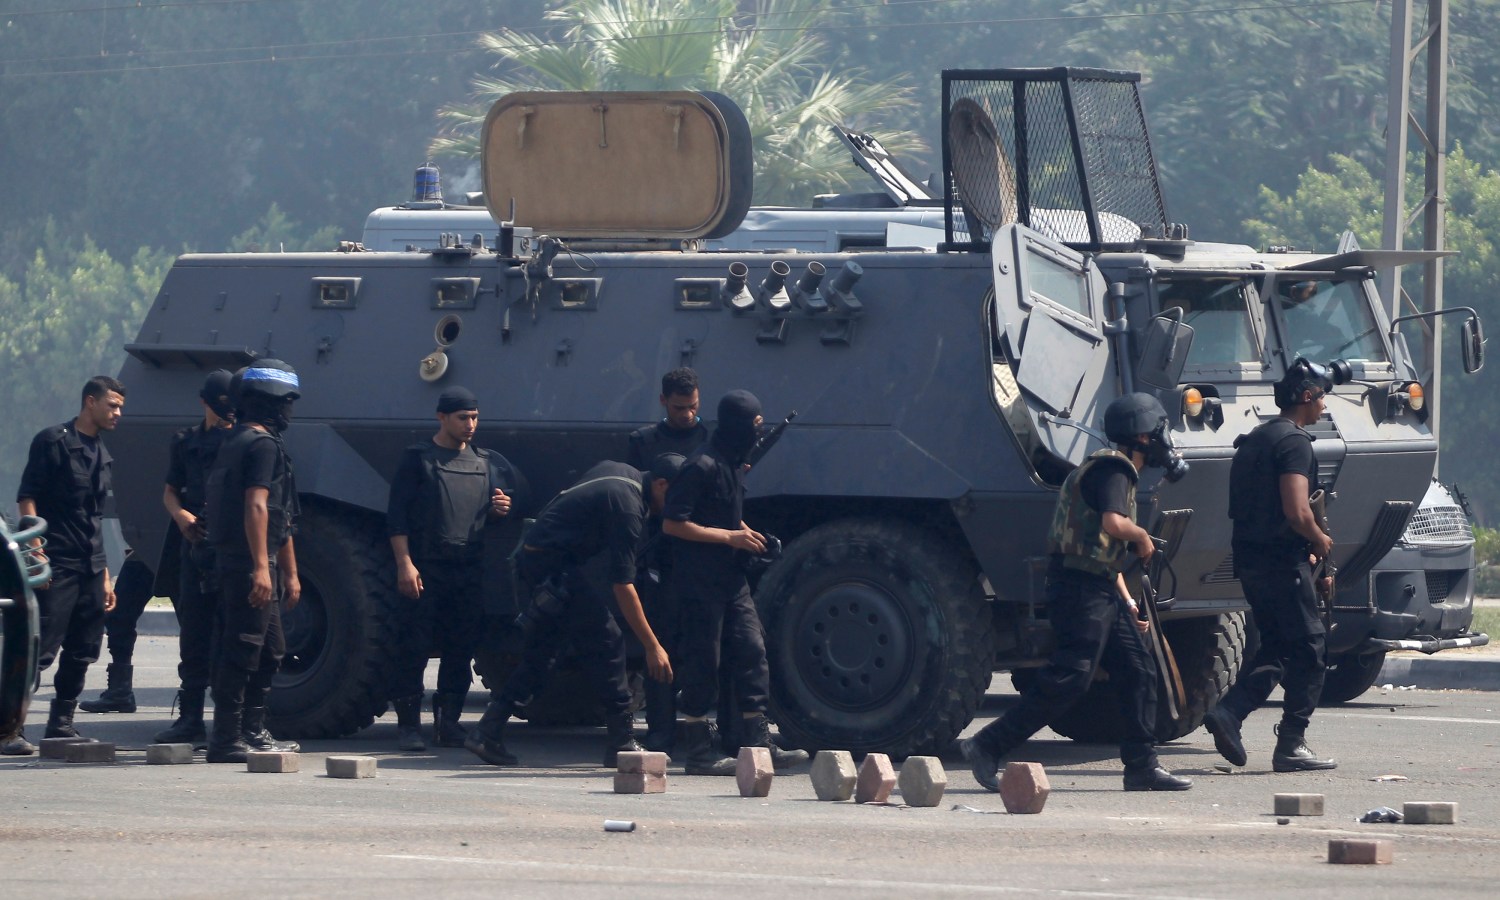 Riot police gather behind an armoured vehicle during clashes with members of the Muslim Brotherhood and supporters of deposed Egyptian President Mohamed Mursi, at Rabaa Adawiya square, where they are camping, in Cairo August 14, 2013. Egyptian security forces killed at least 30 people on Wednesday when they cleared a camp of Cairo protesters who were demanding the reinstatement of deposed President Mohamed Mursi, his Muslim Brotherhood movement said. REUTERS/Amr Abdallah Dalsh (EGYPT - Tags: POLITICS CIVIL UNREST) - RTX12KYJ